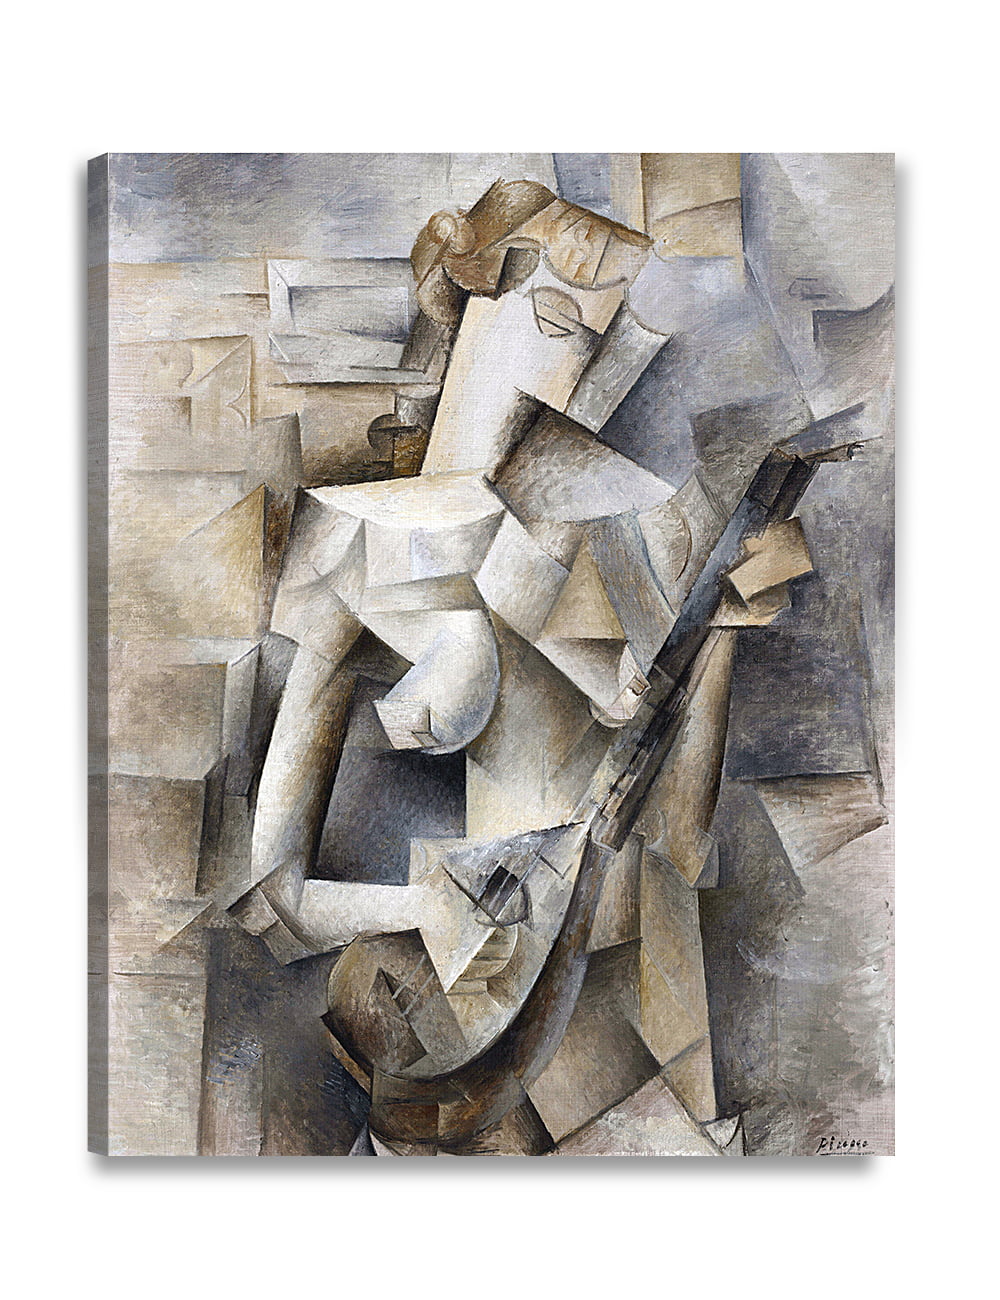 DECORARTS Girl With Mandolin by Pablo Picasso, Oversize Canvas Wall Art  Giclee Prints on Acid Free Cotton Canvas for Home Decor W 32